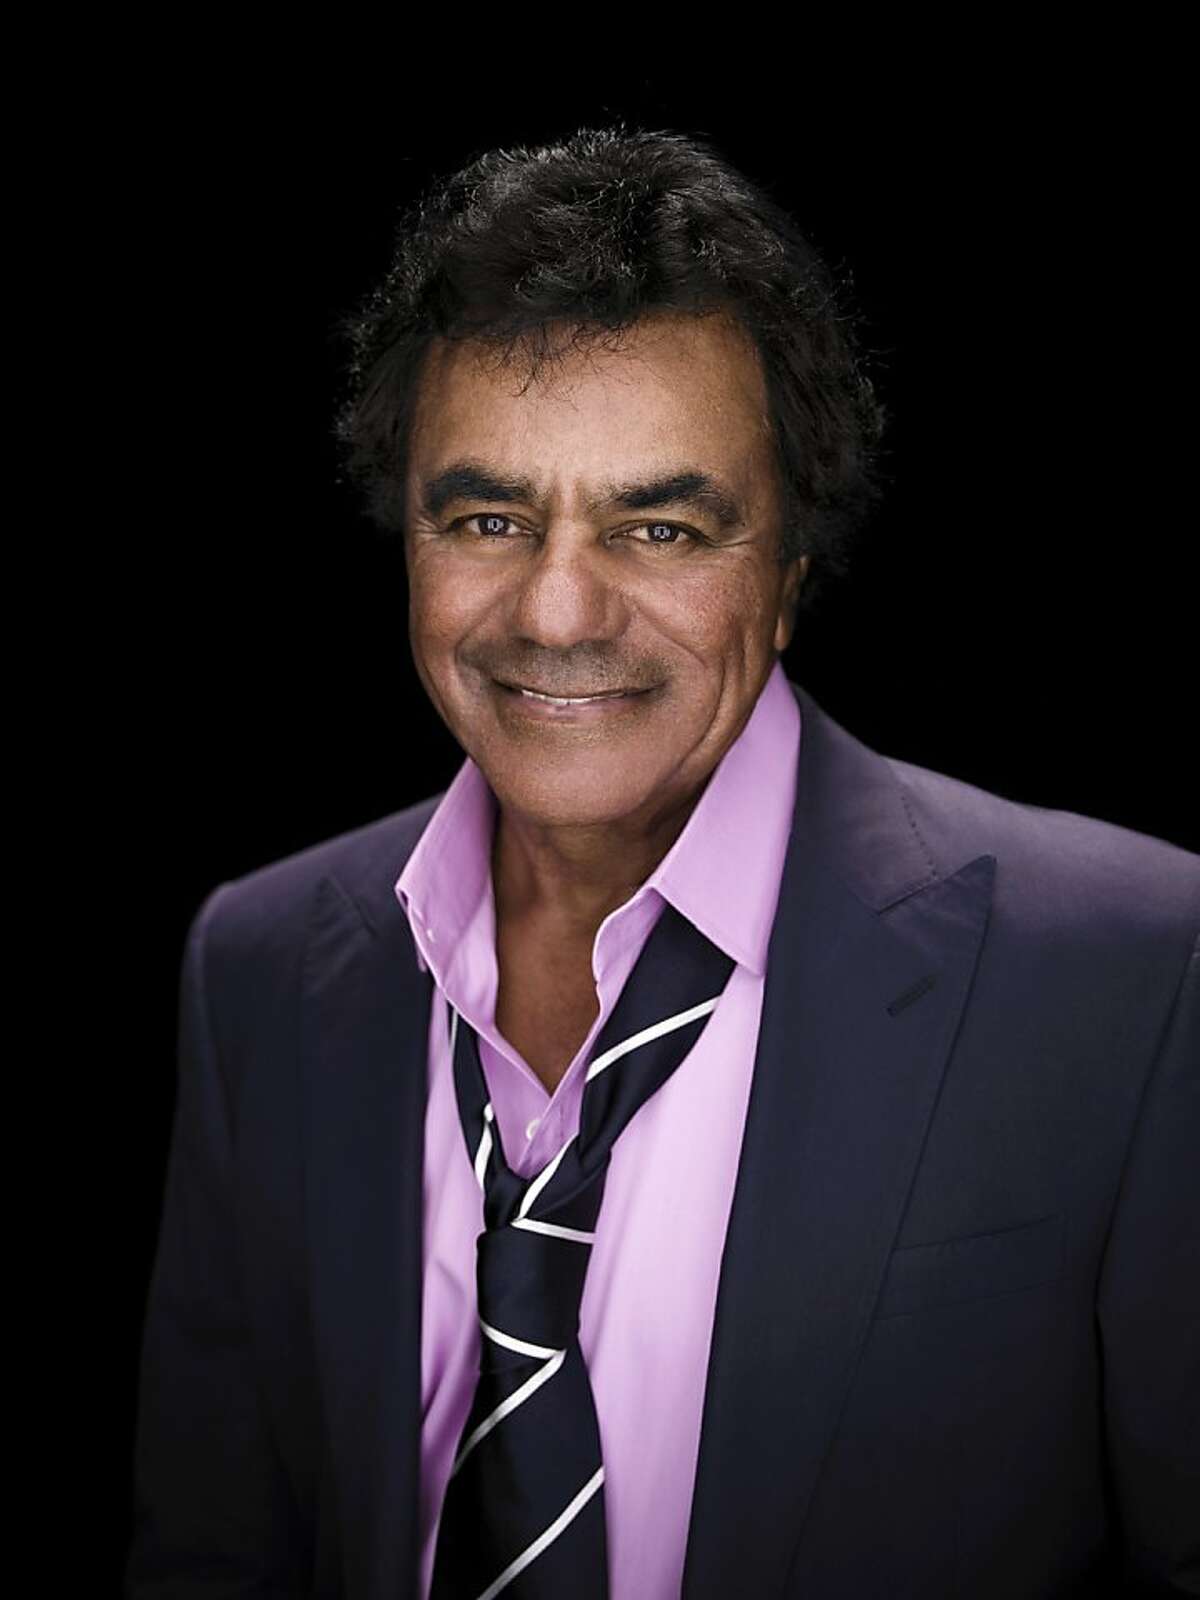 San Francisco native Johnny Mathis returns to his hometown for two summer concerts with the San Francisco Symphony Friday and Saturday at Davies Symphony Hall. Photo by Jeff Dunas